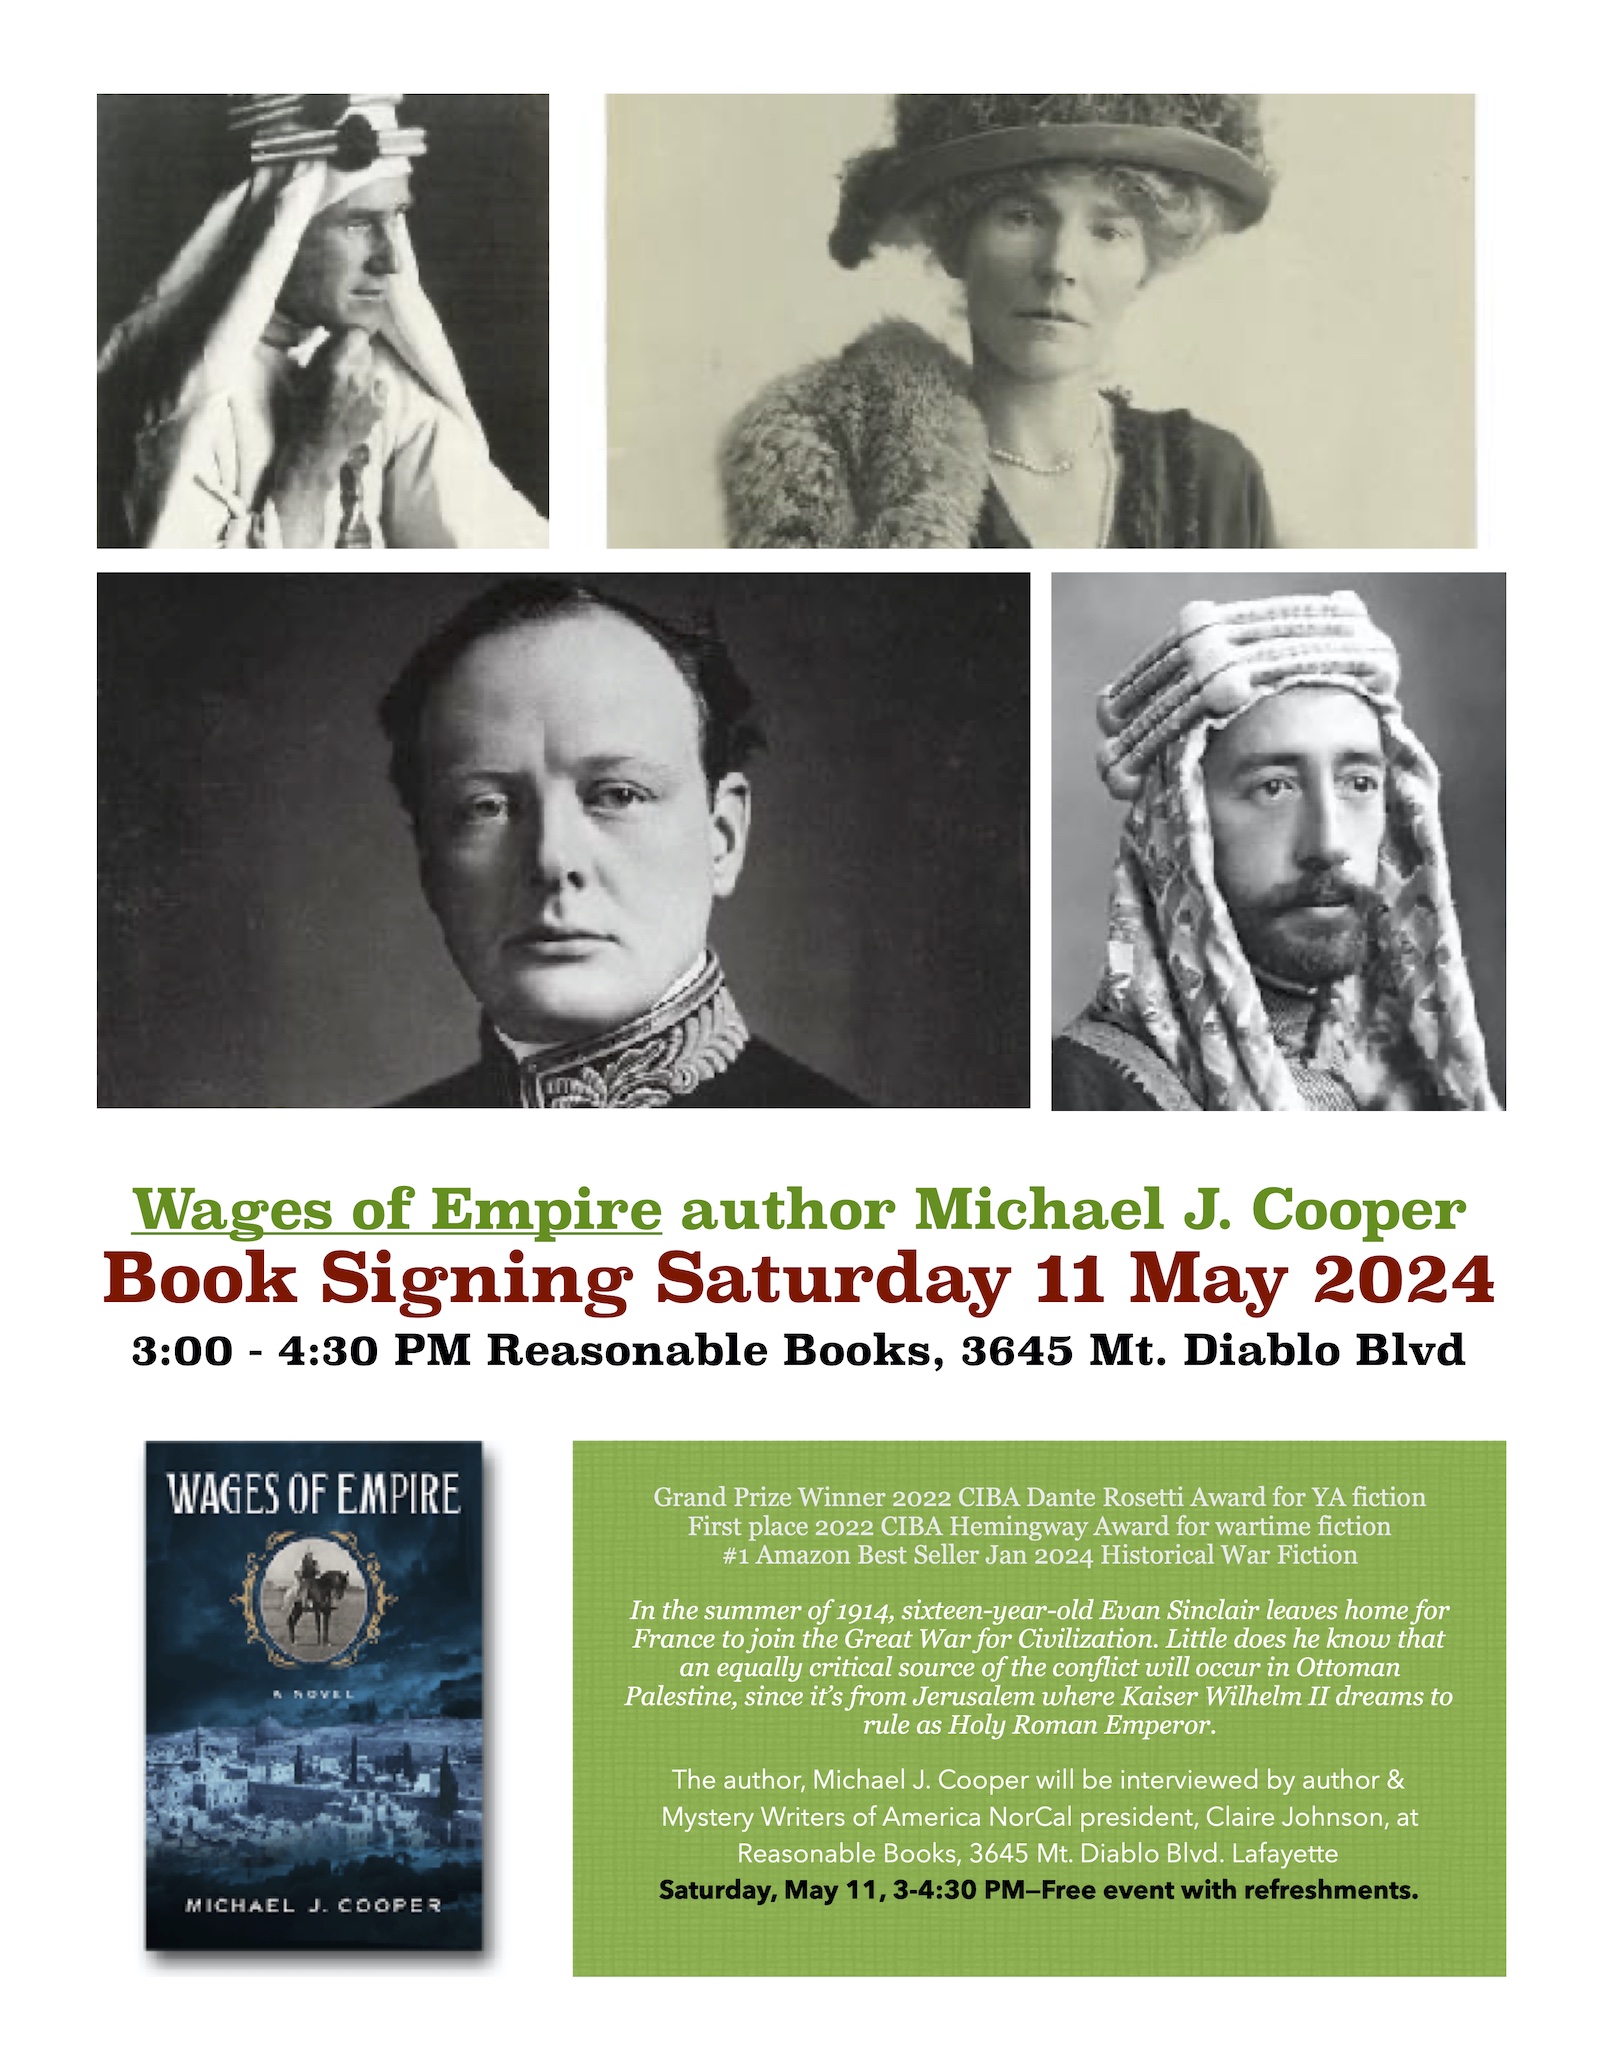 Book signing with Michael J. Cooper Saturday 11 May 2024 3 PM